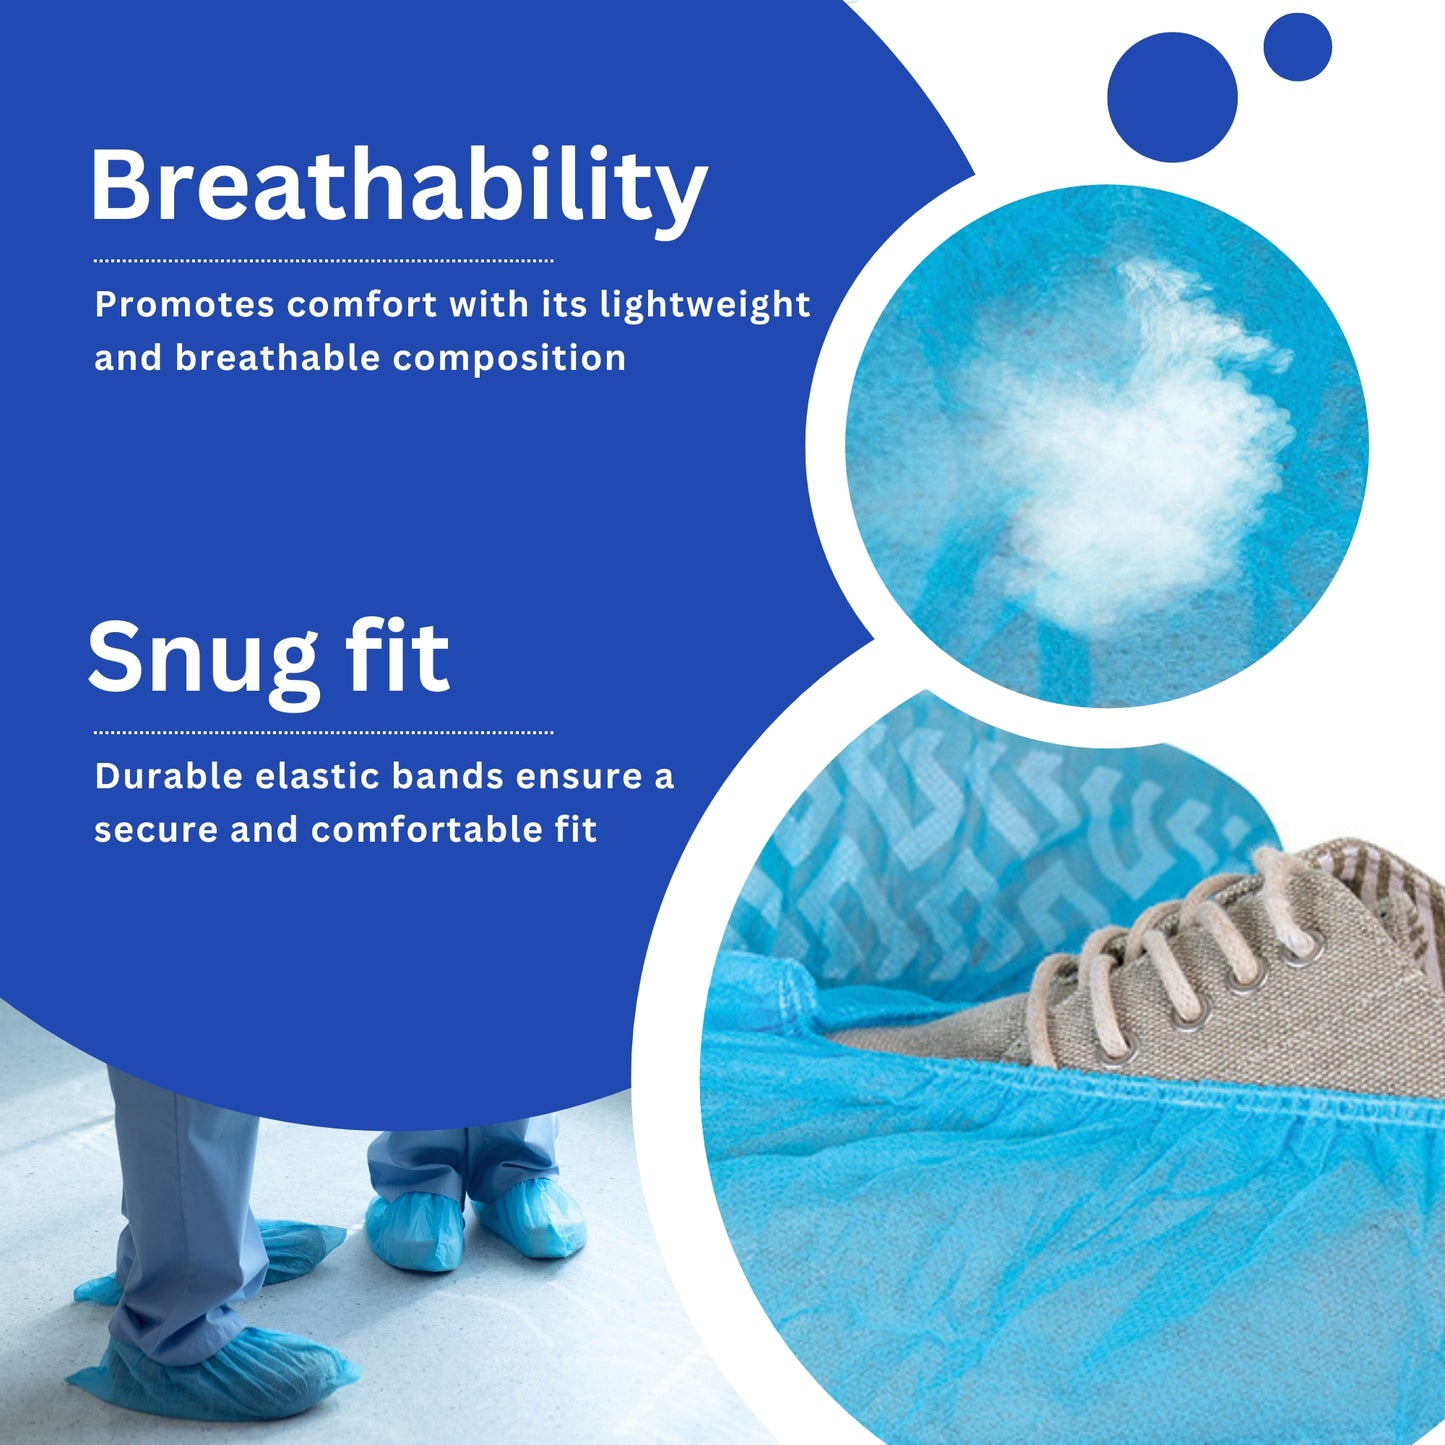 100 pcs - Disposable Anti-Skid Shoe Covers, 40 grams Premium, Tread Protection, Extra Large, Water Resistant, Non-Toxic, 100% Virgin Fabric, Blue